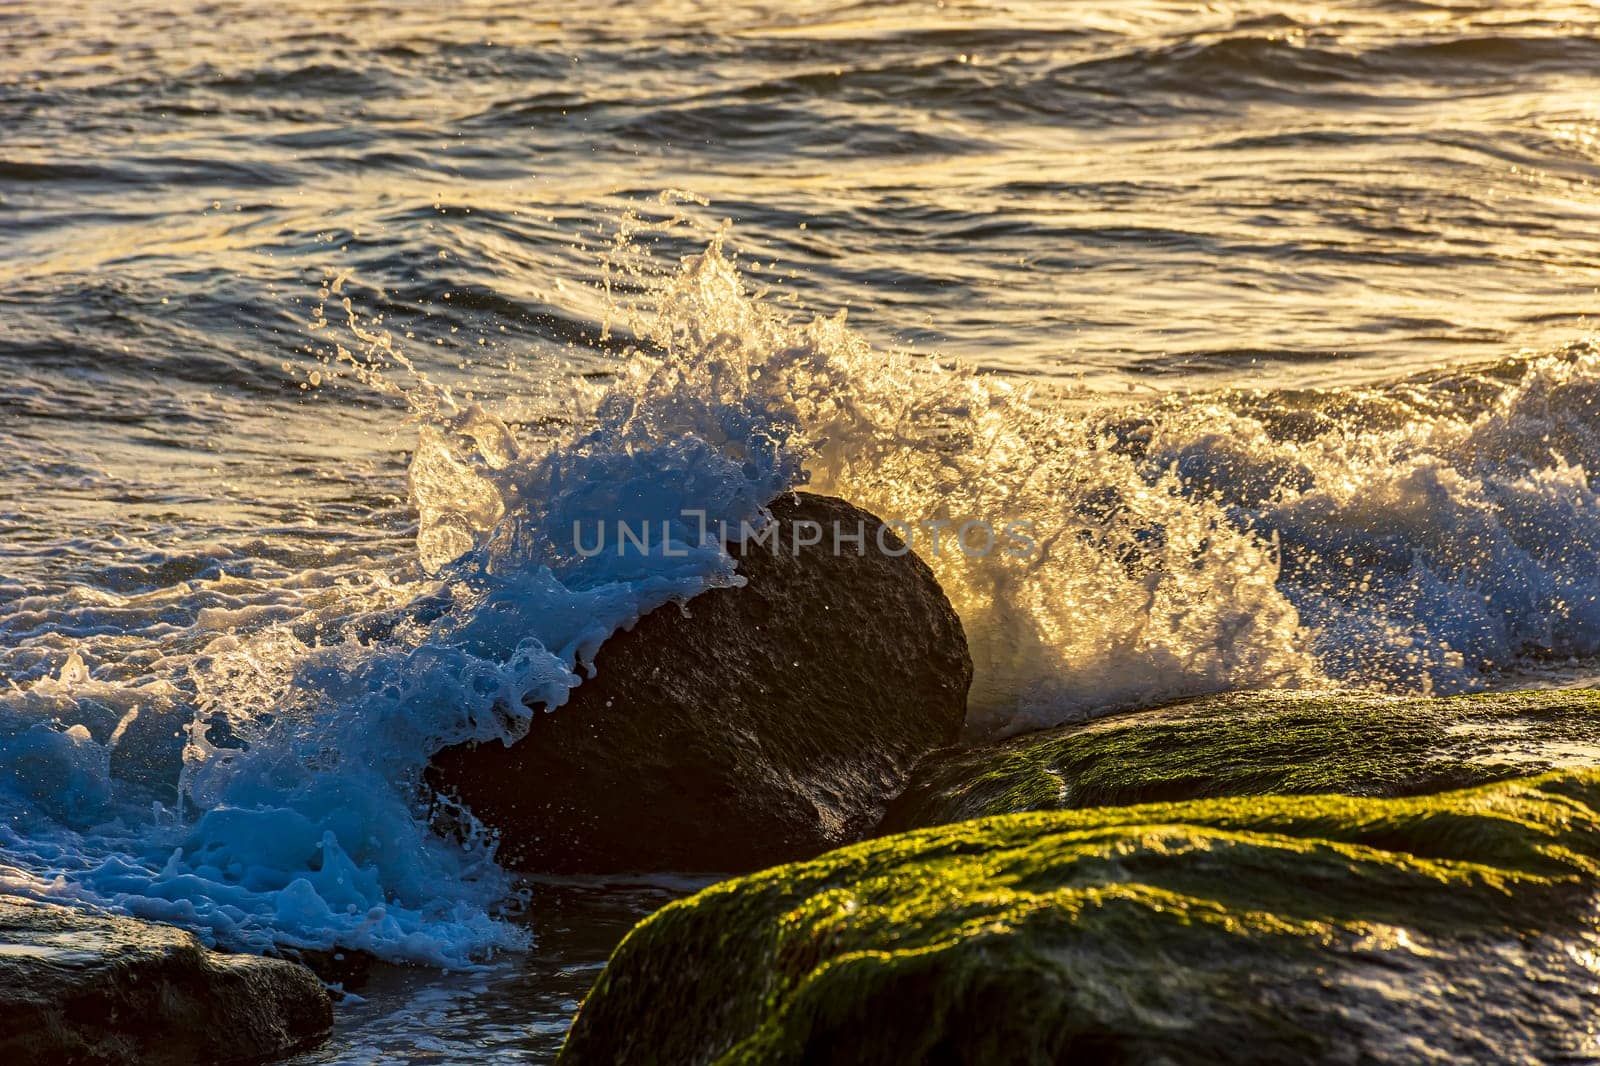 Water and sea foam splashing with waves crash against rocks during tropical sunset